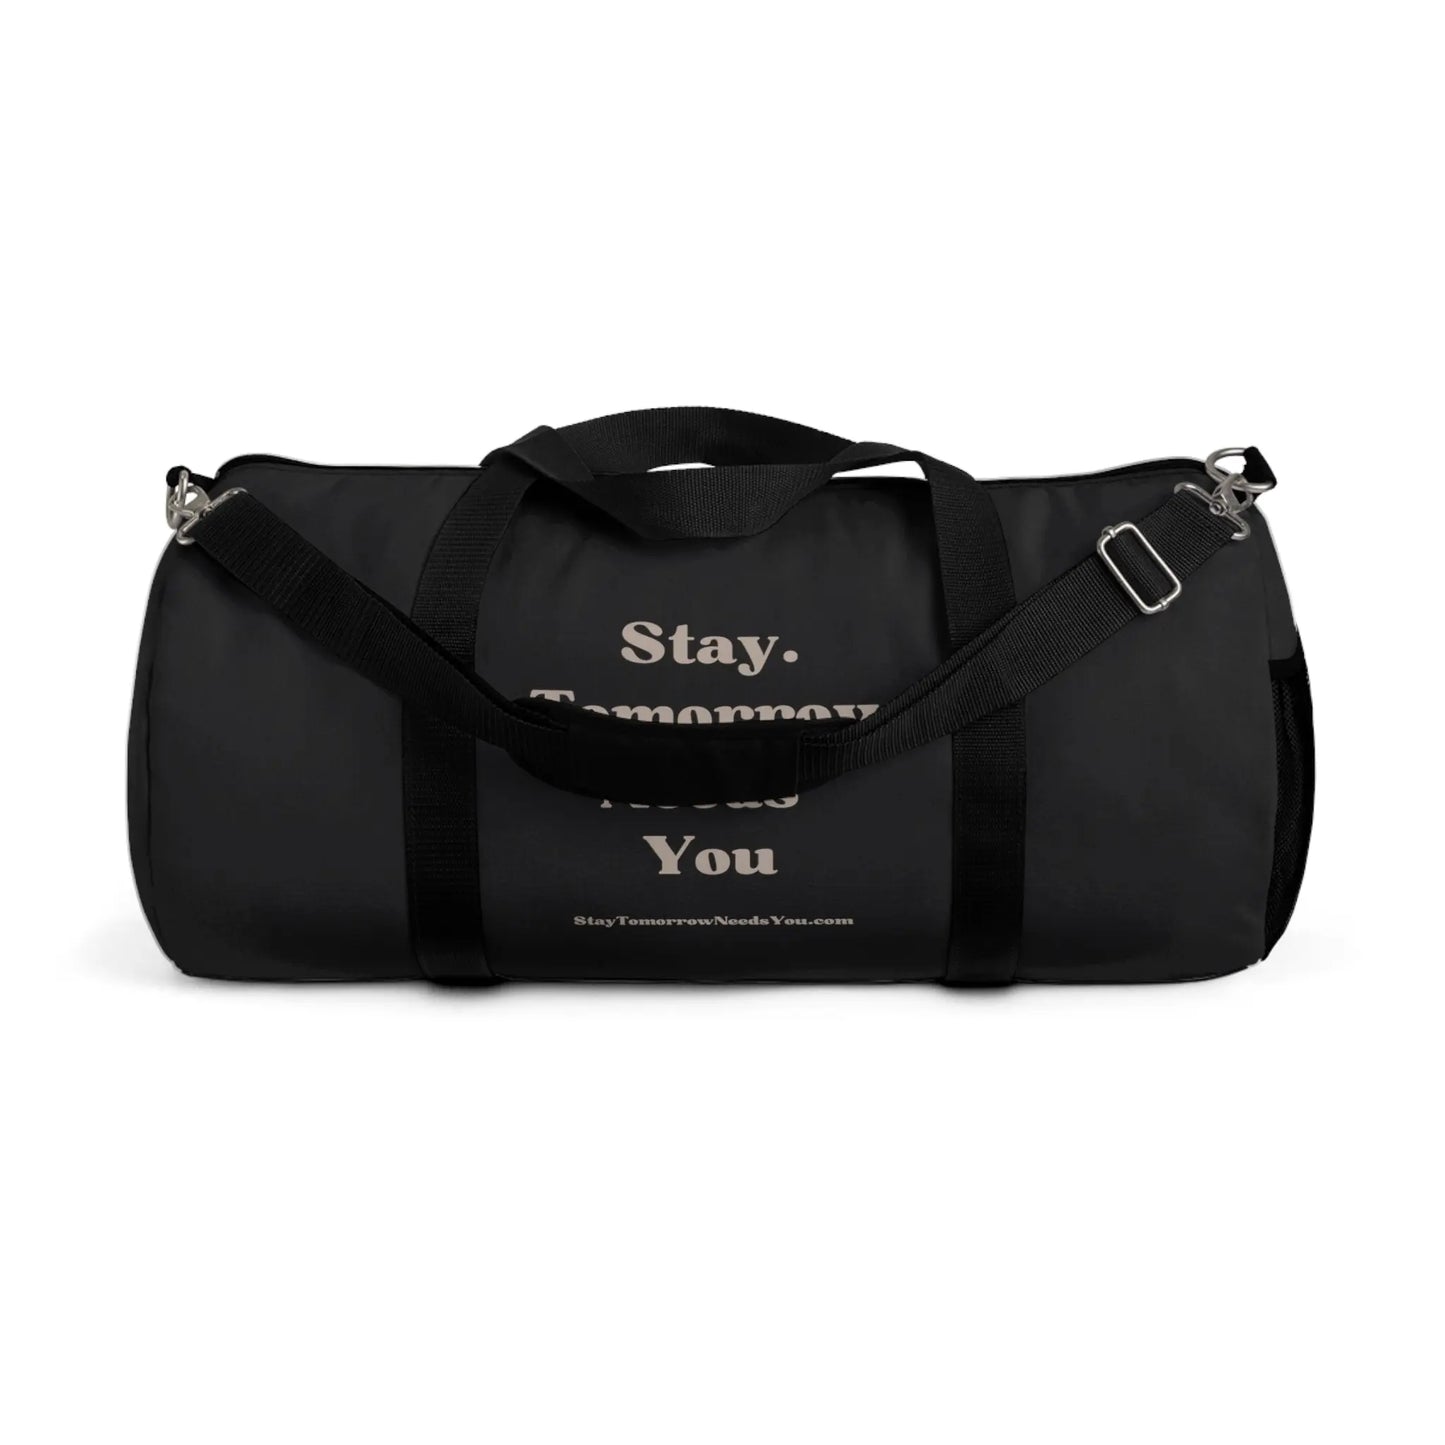 Stay Tomorrow Needs You Suicide Awareness Gym Duffel Bag - Carry your gear with style and spread mental health awareness. Stay motivated! Shop now